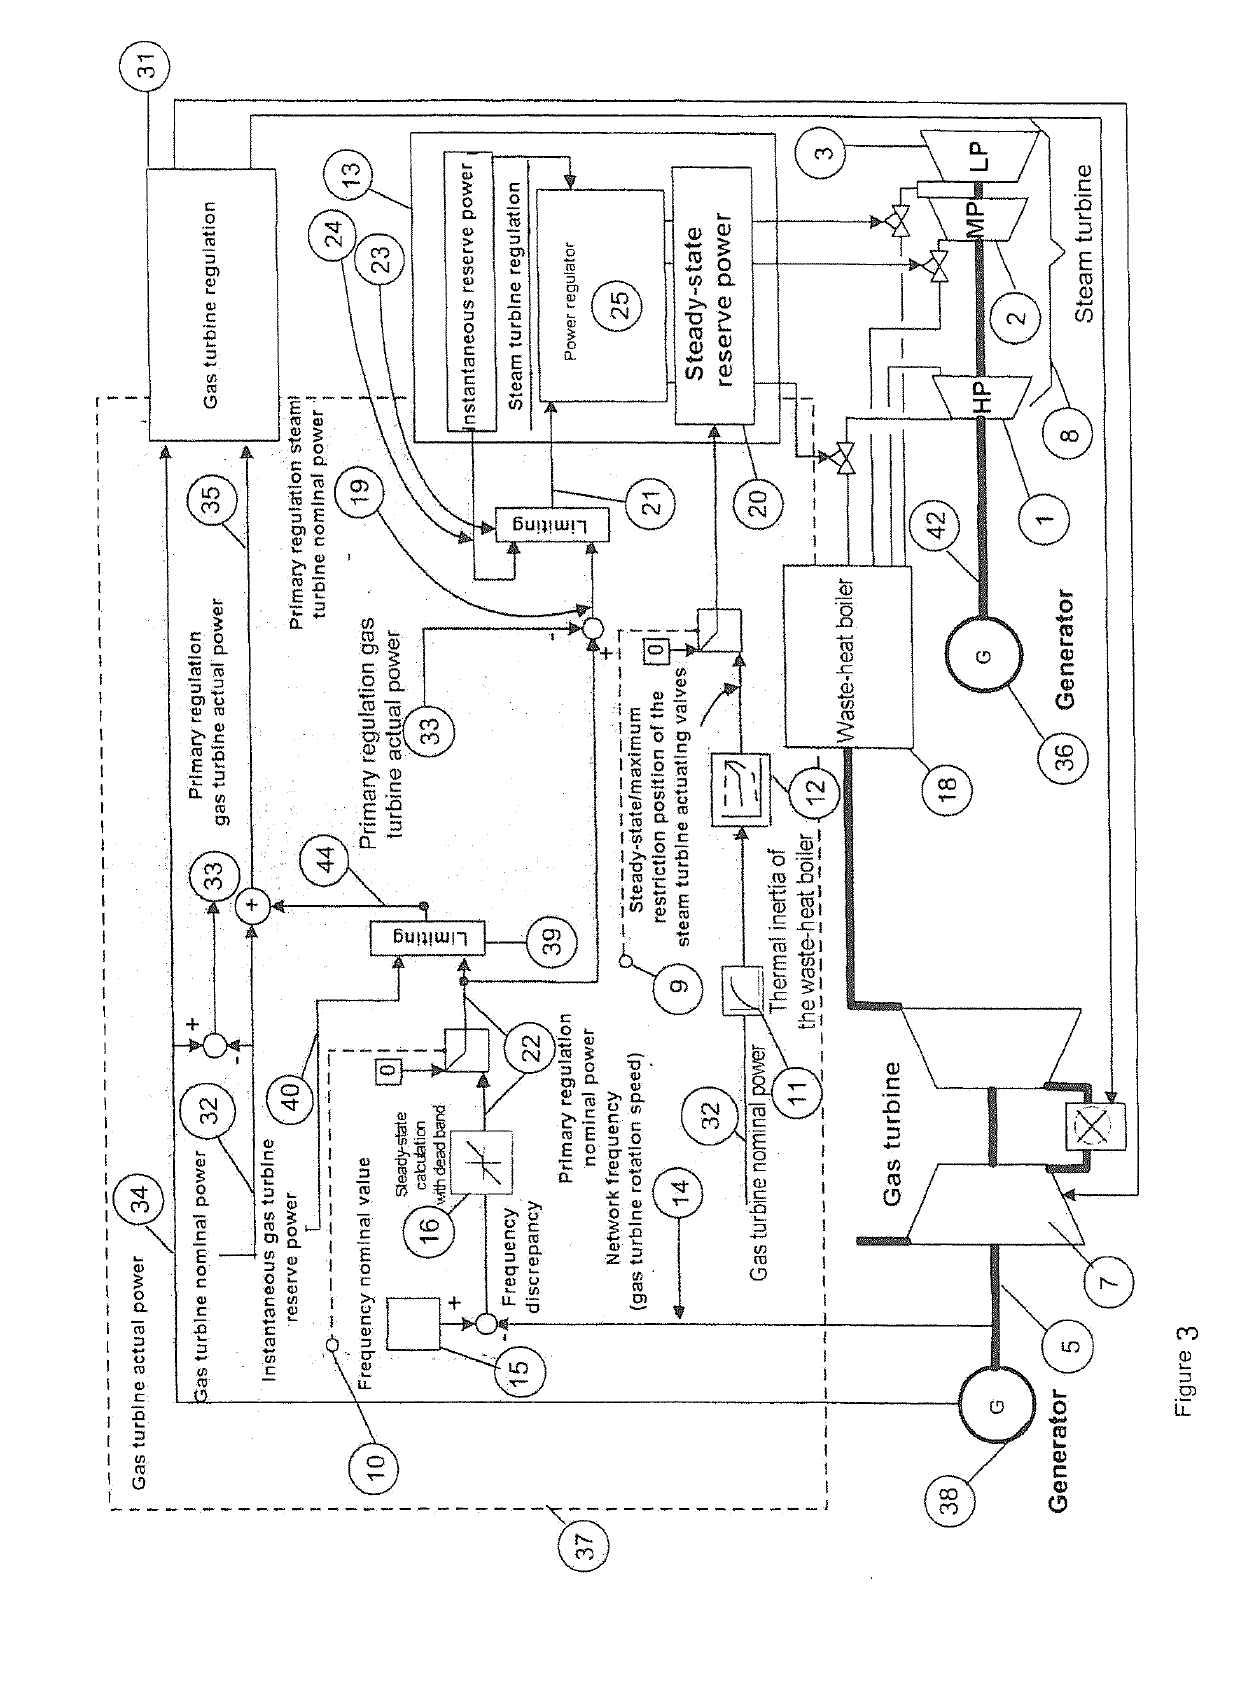 Method for primary control of a combined gas and steam turbine arrangement